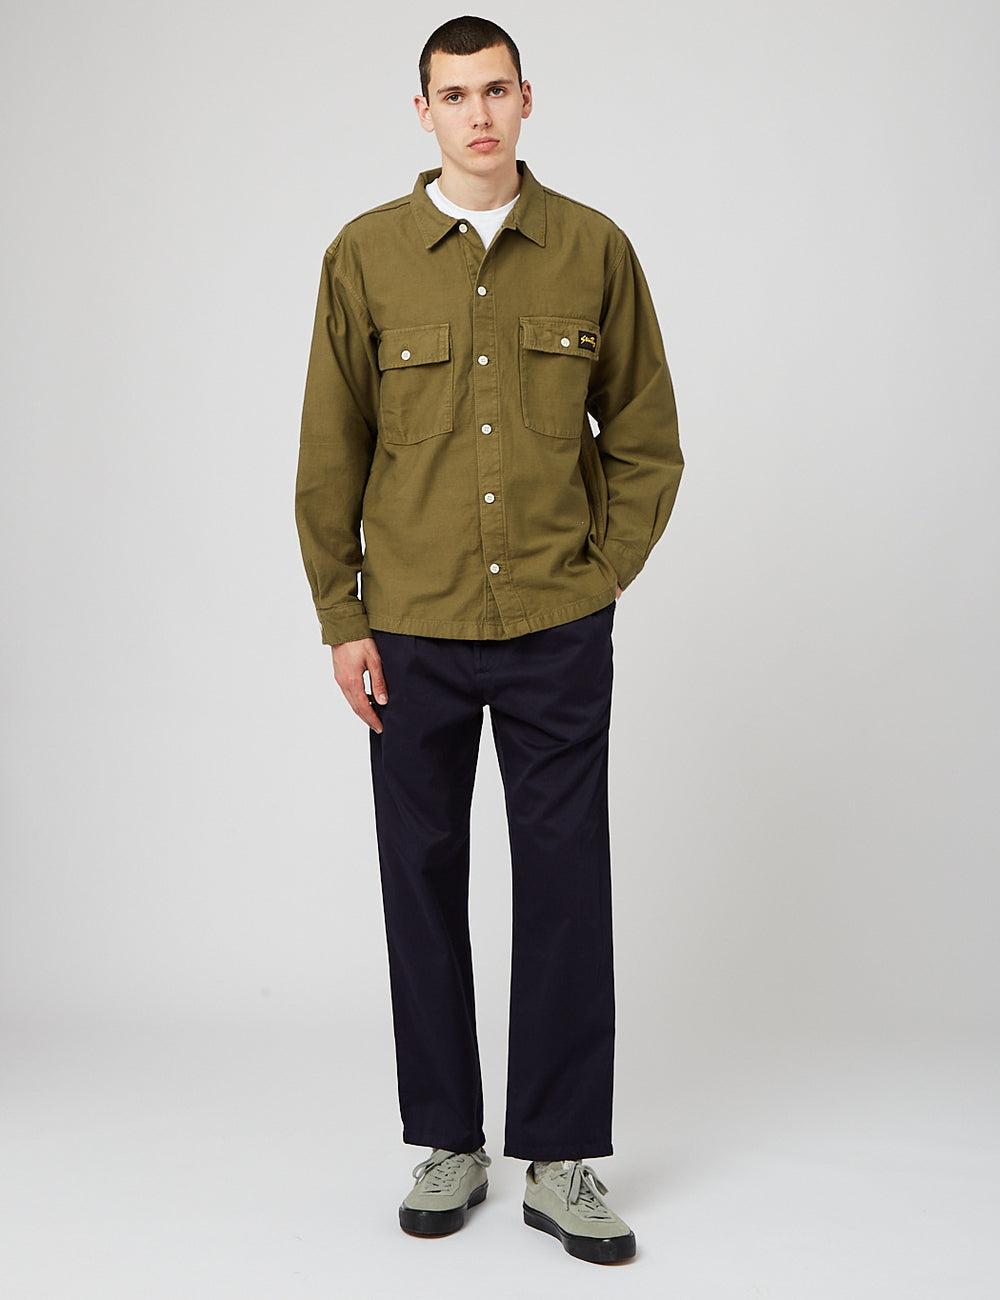 Stan Ray CPO Shirt - Olive Green